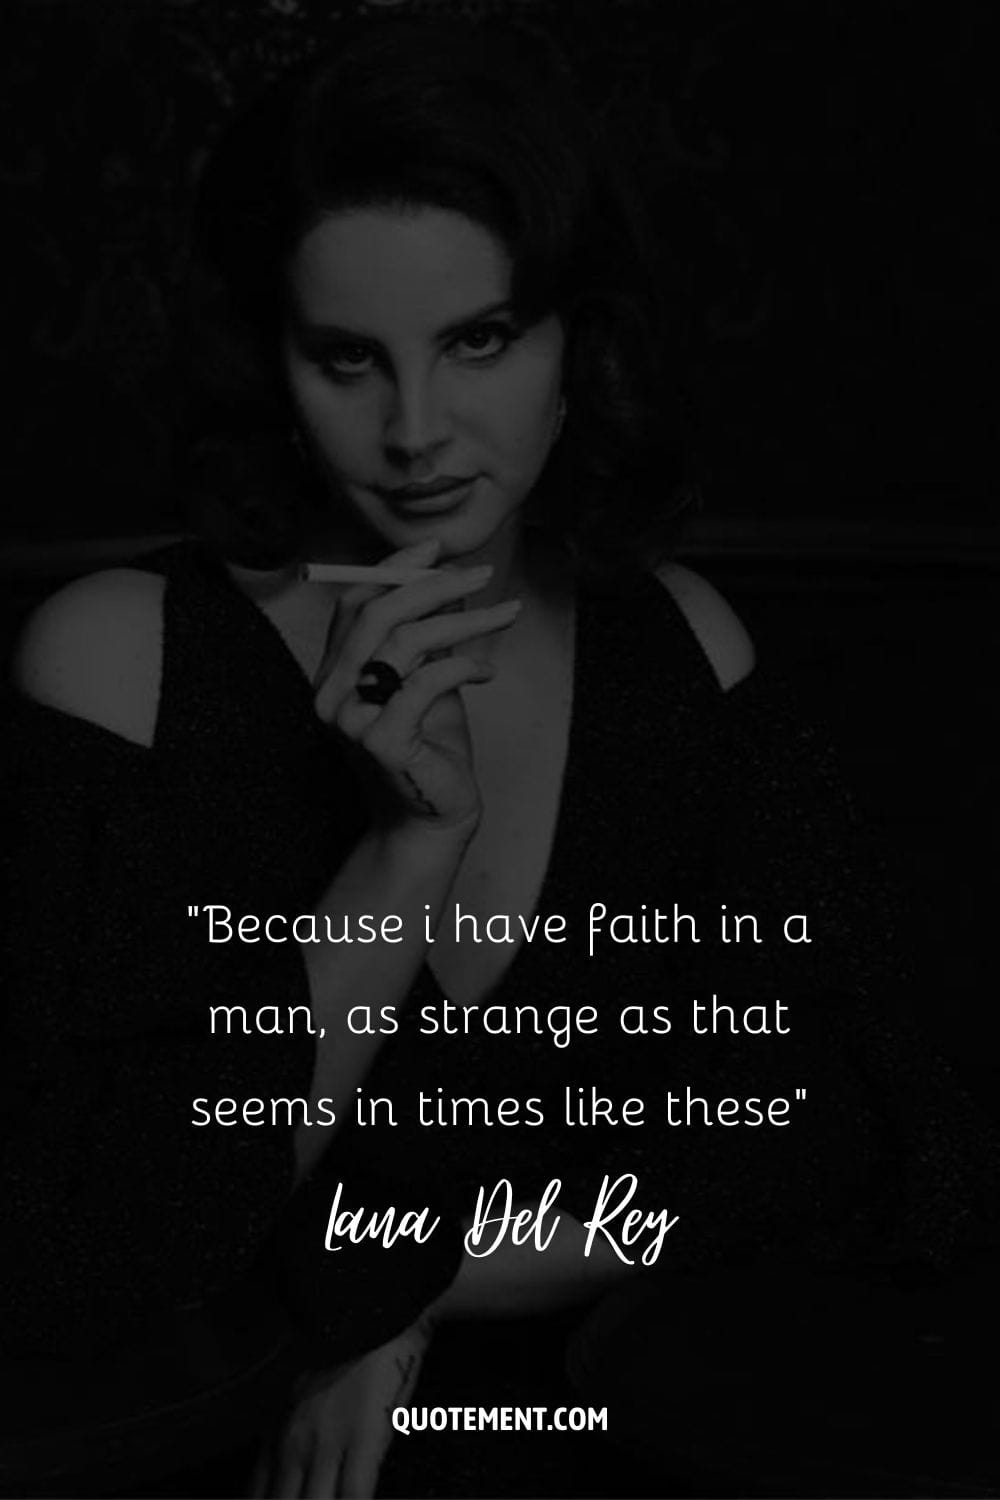 Because i have faith in a man, as strange as that seems in times like these